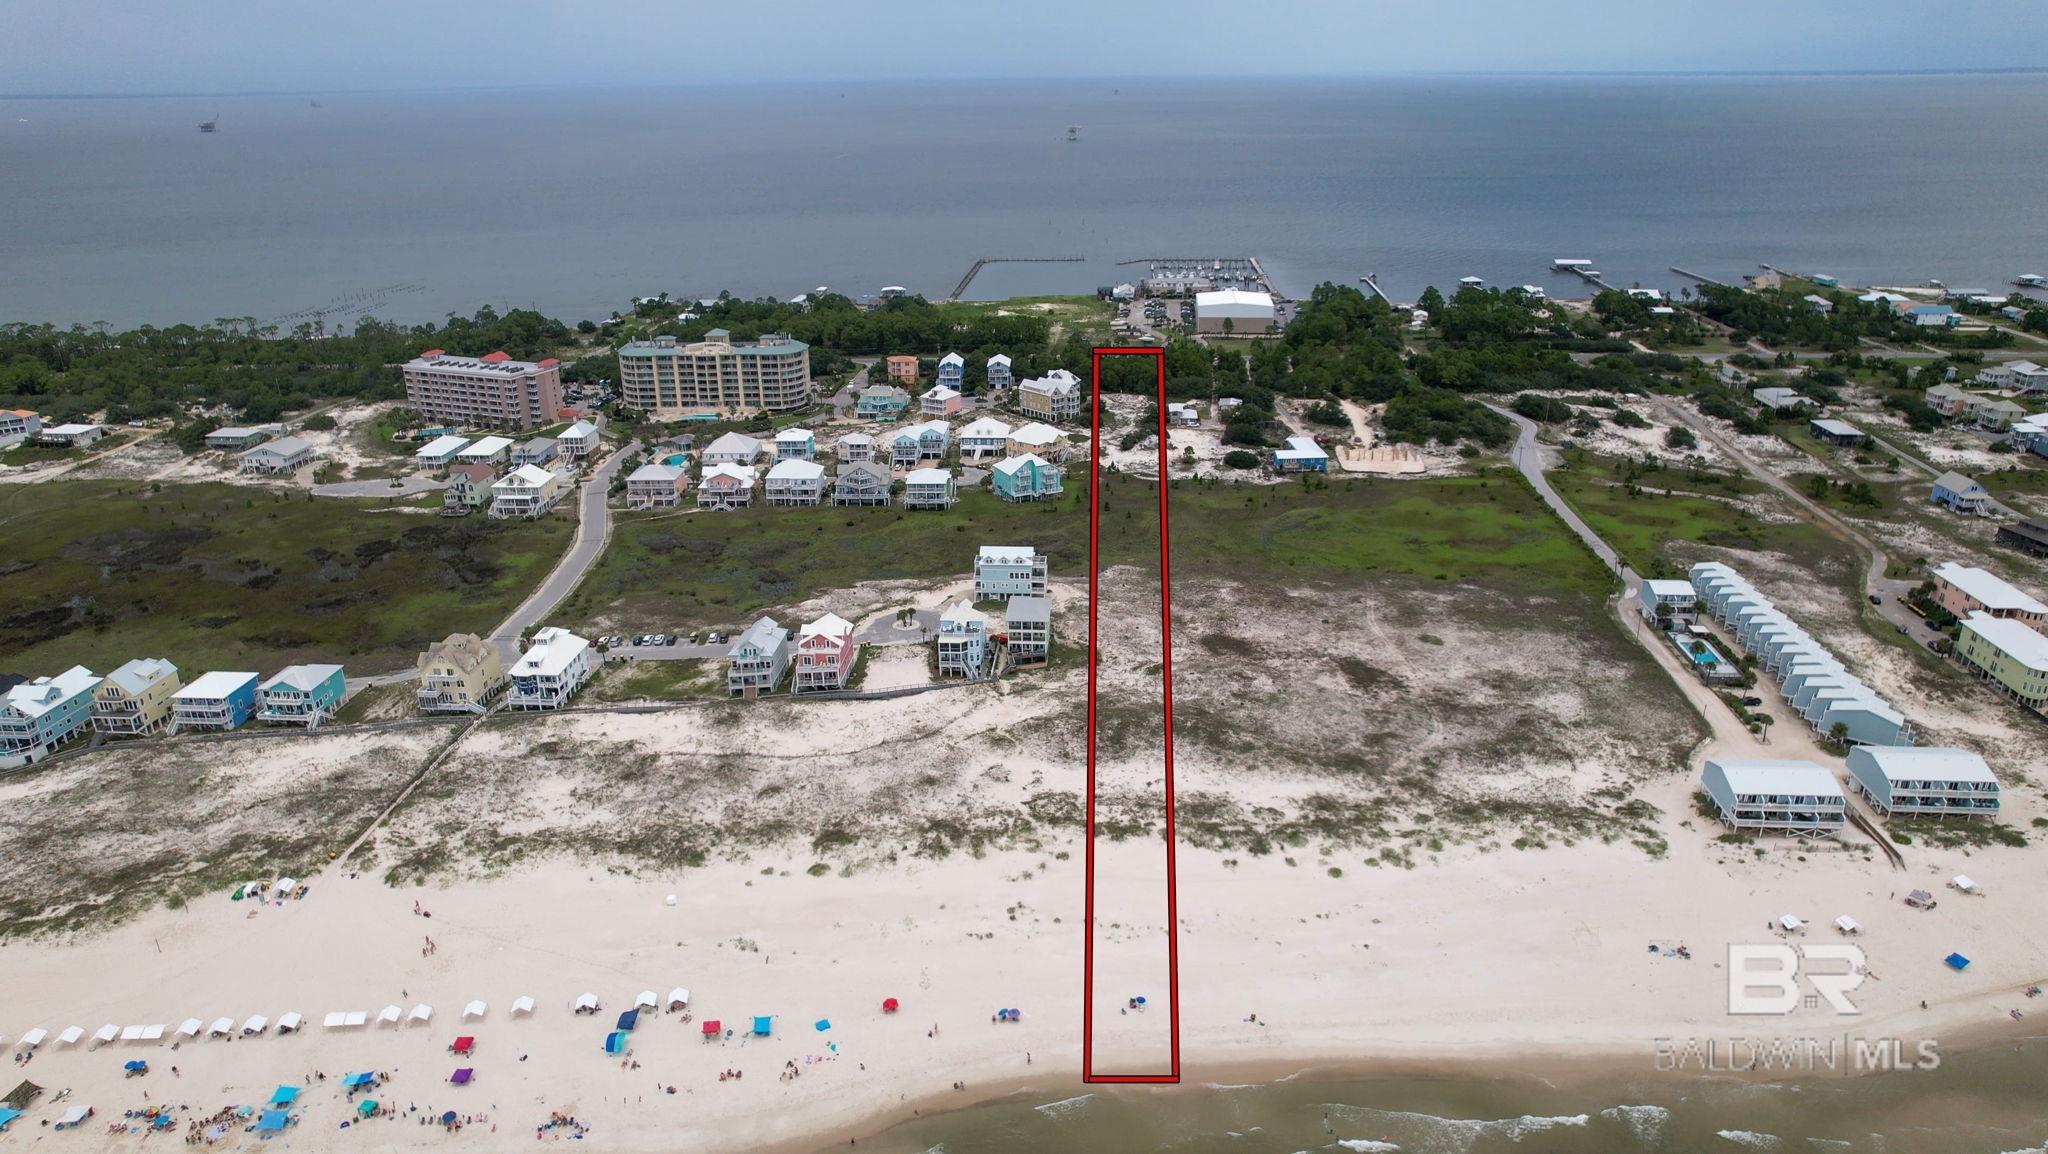 A must see! Open Gulf Front 3.4 acre lot, 100 x 1480. Convenient location across from the Fort Morgan Marina. Build your custom beach house or duplex. The marina offers many amenities. Take advantage of the nearby Gulf Coast Best Charter Fishing Fleet dry storage for boats up to 36’ in length, wet slips, dockside fuel, live or frozen bait, dock store, fish cleaning station, and fuel service. Don't forget the restaurants and private dolphin cruises. Everything you need to enjoy your new beach lifestyle!